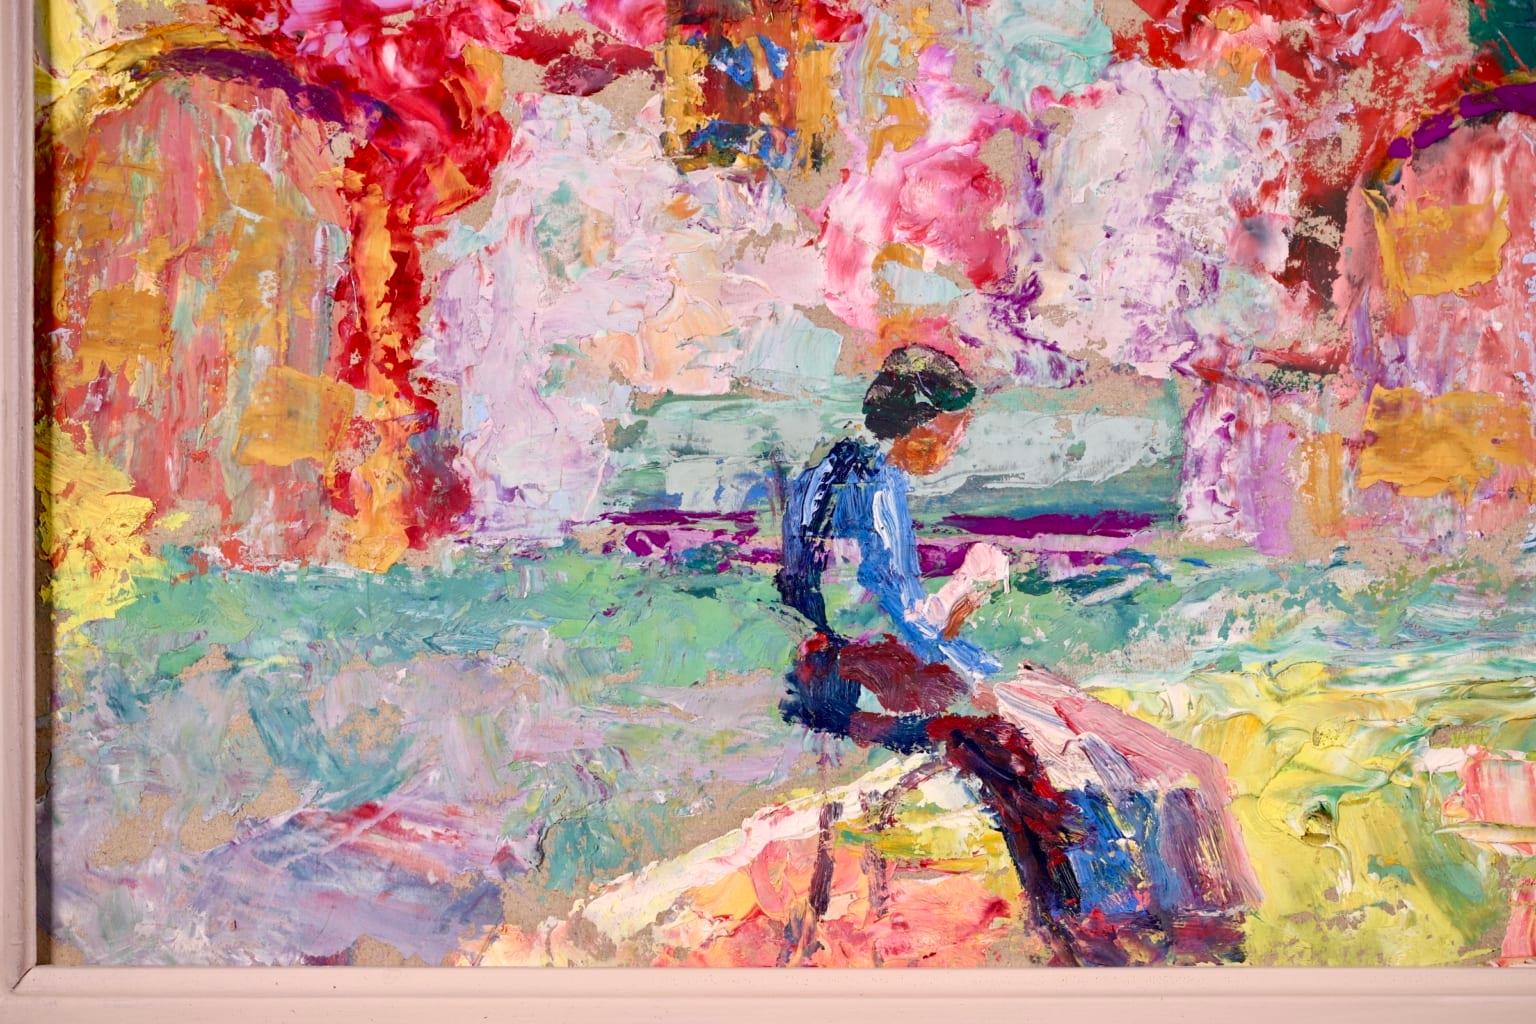 Courtyard - Post Impressionist Oil, Figure in Landscape by Victor Charreton 4